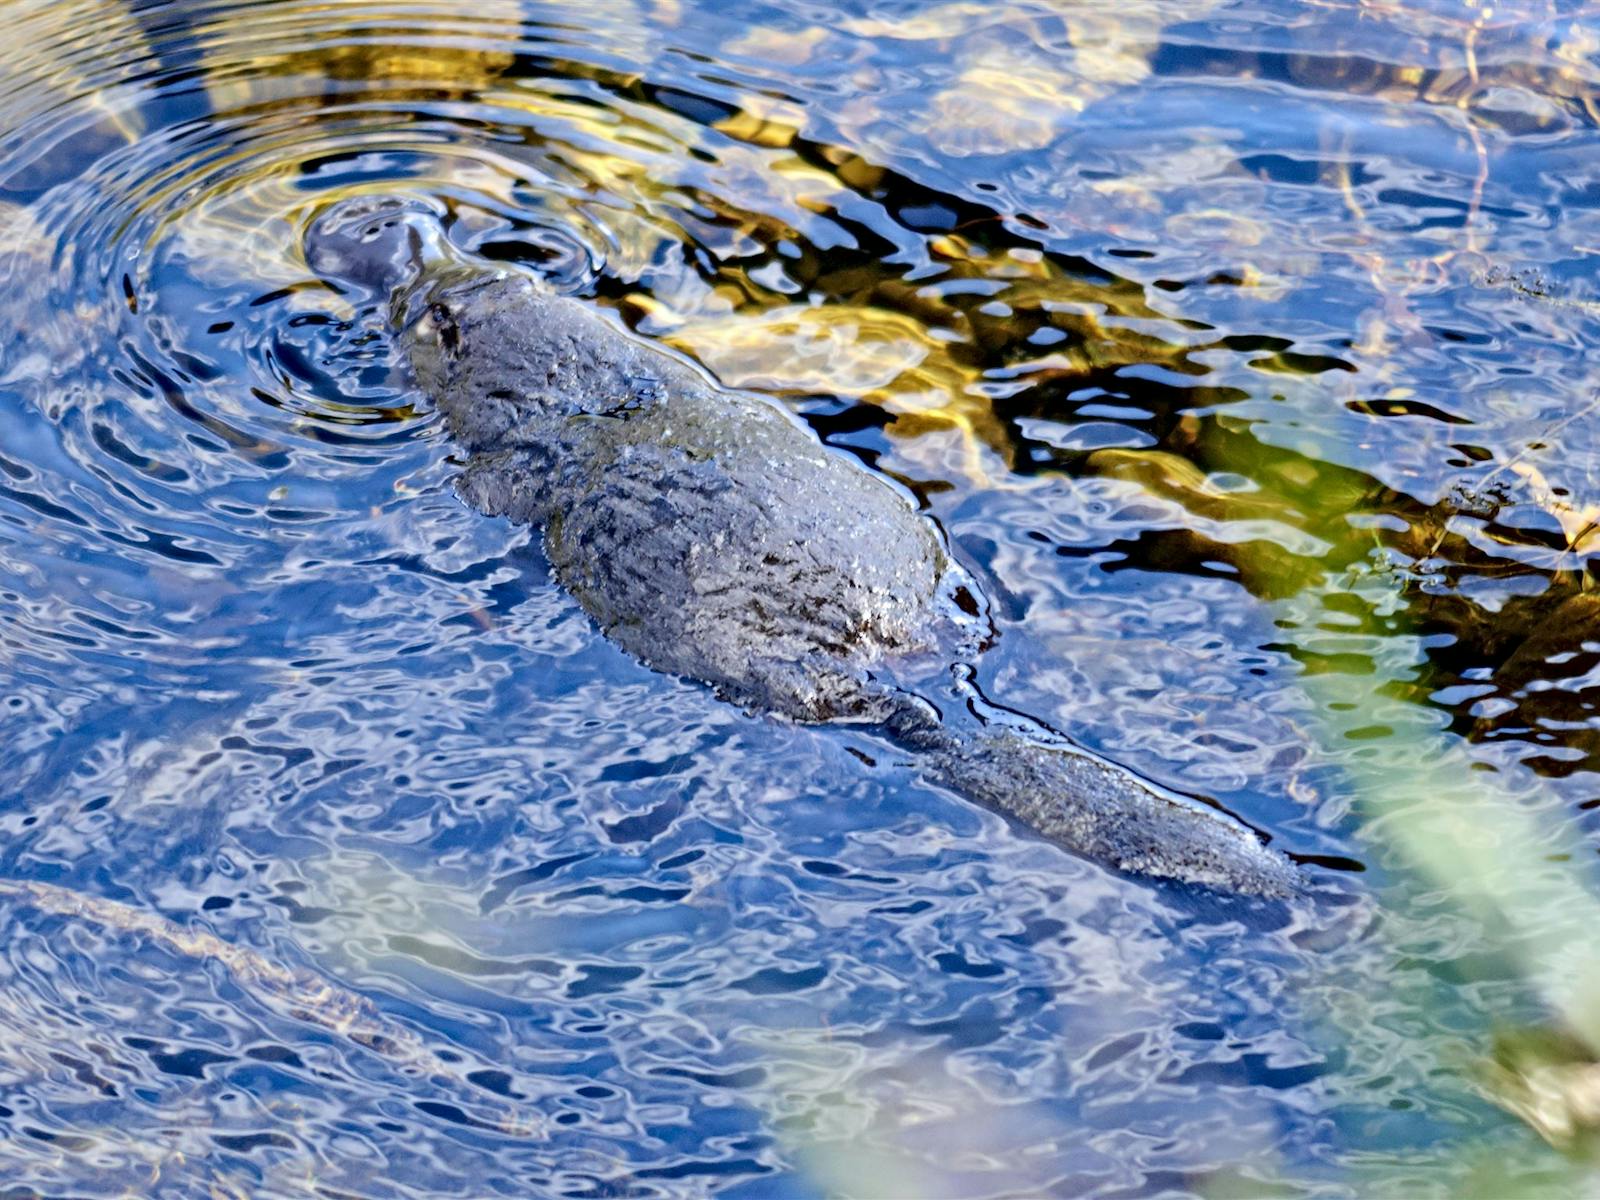 The resident platypus at Wobbly Boot Vineyard